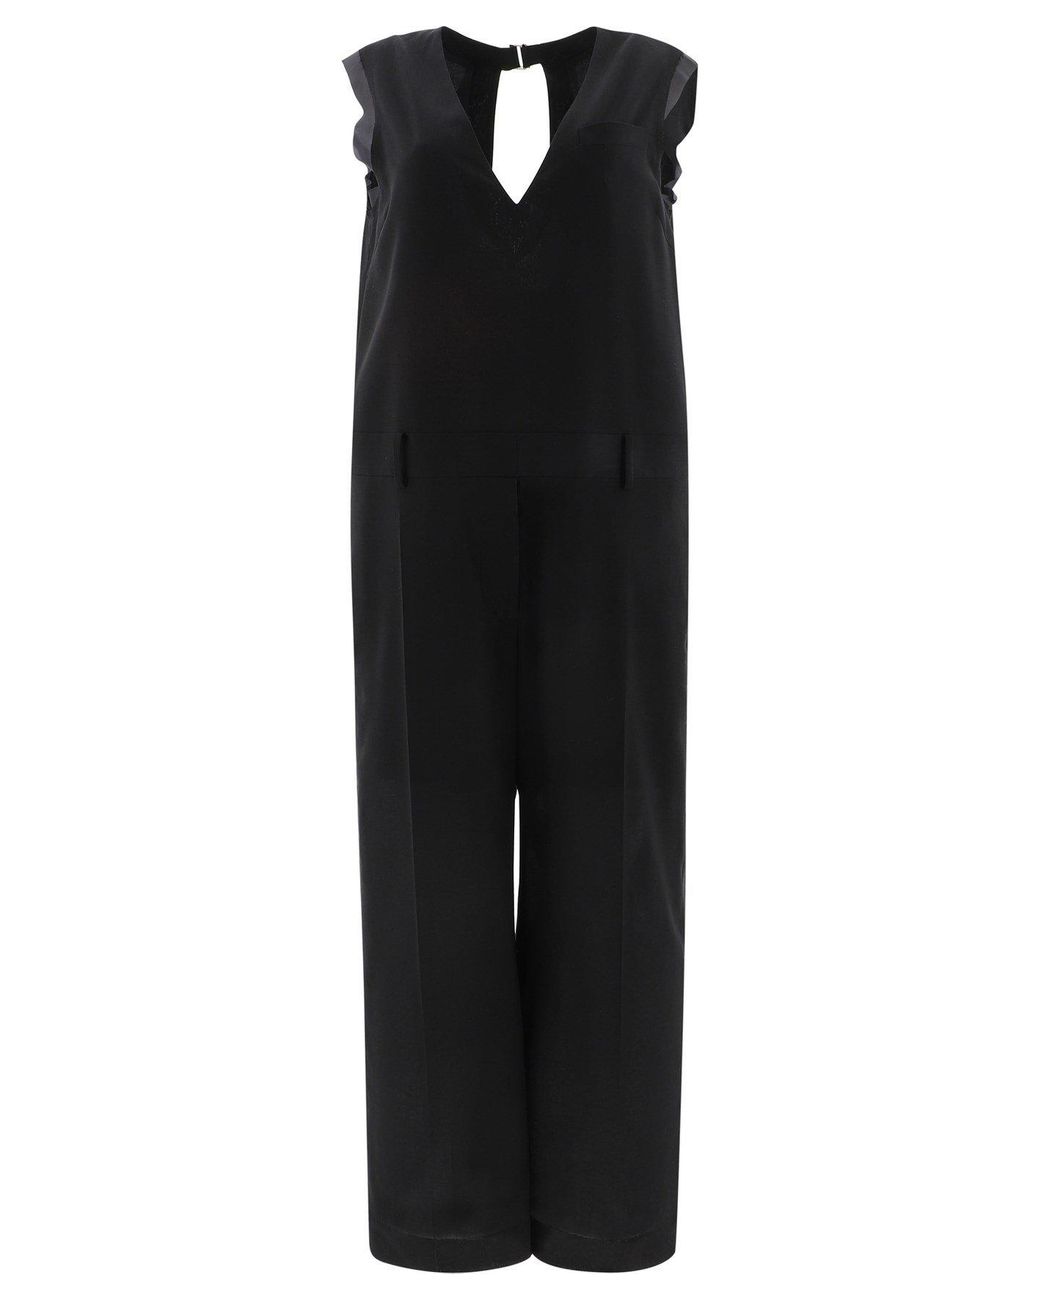 Sacai Synthetic Polyester Jumpsuit in Black - Save 53% - Lyst